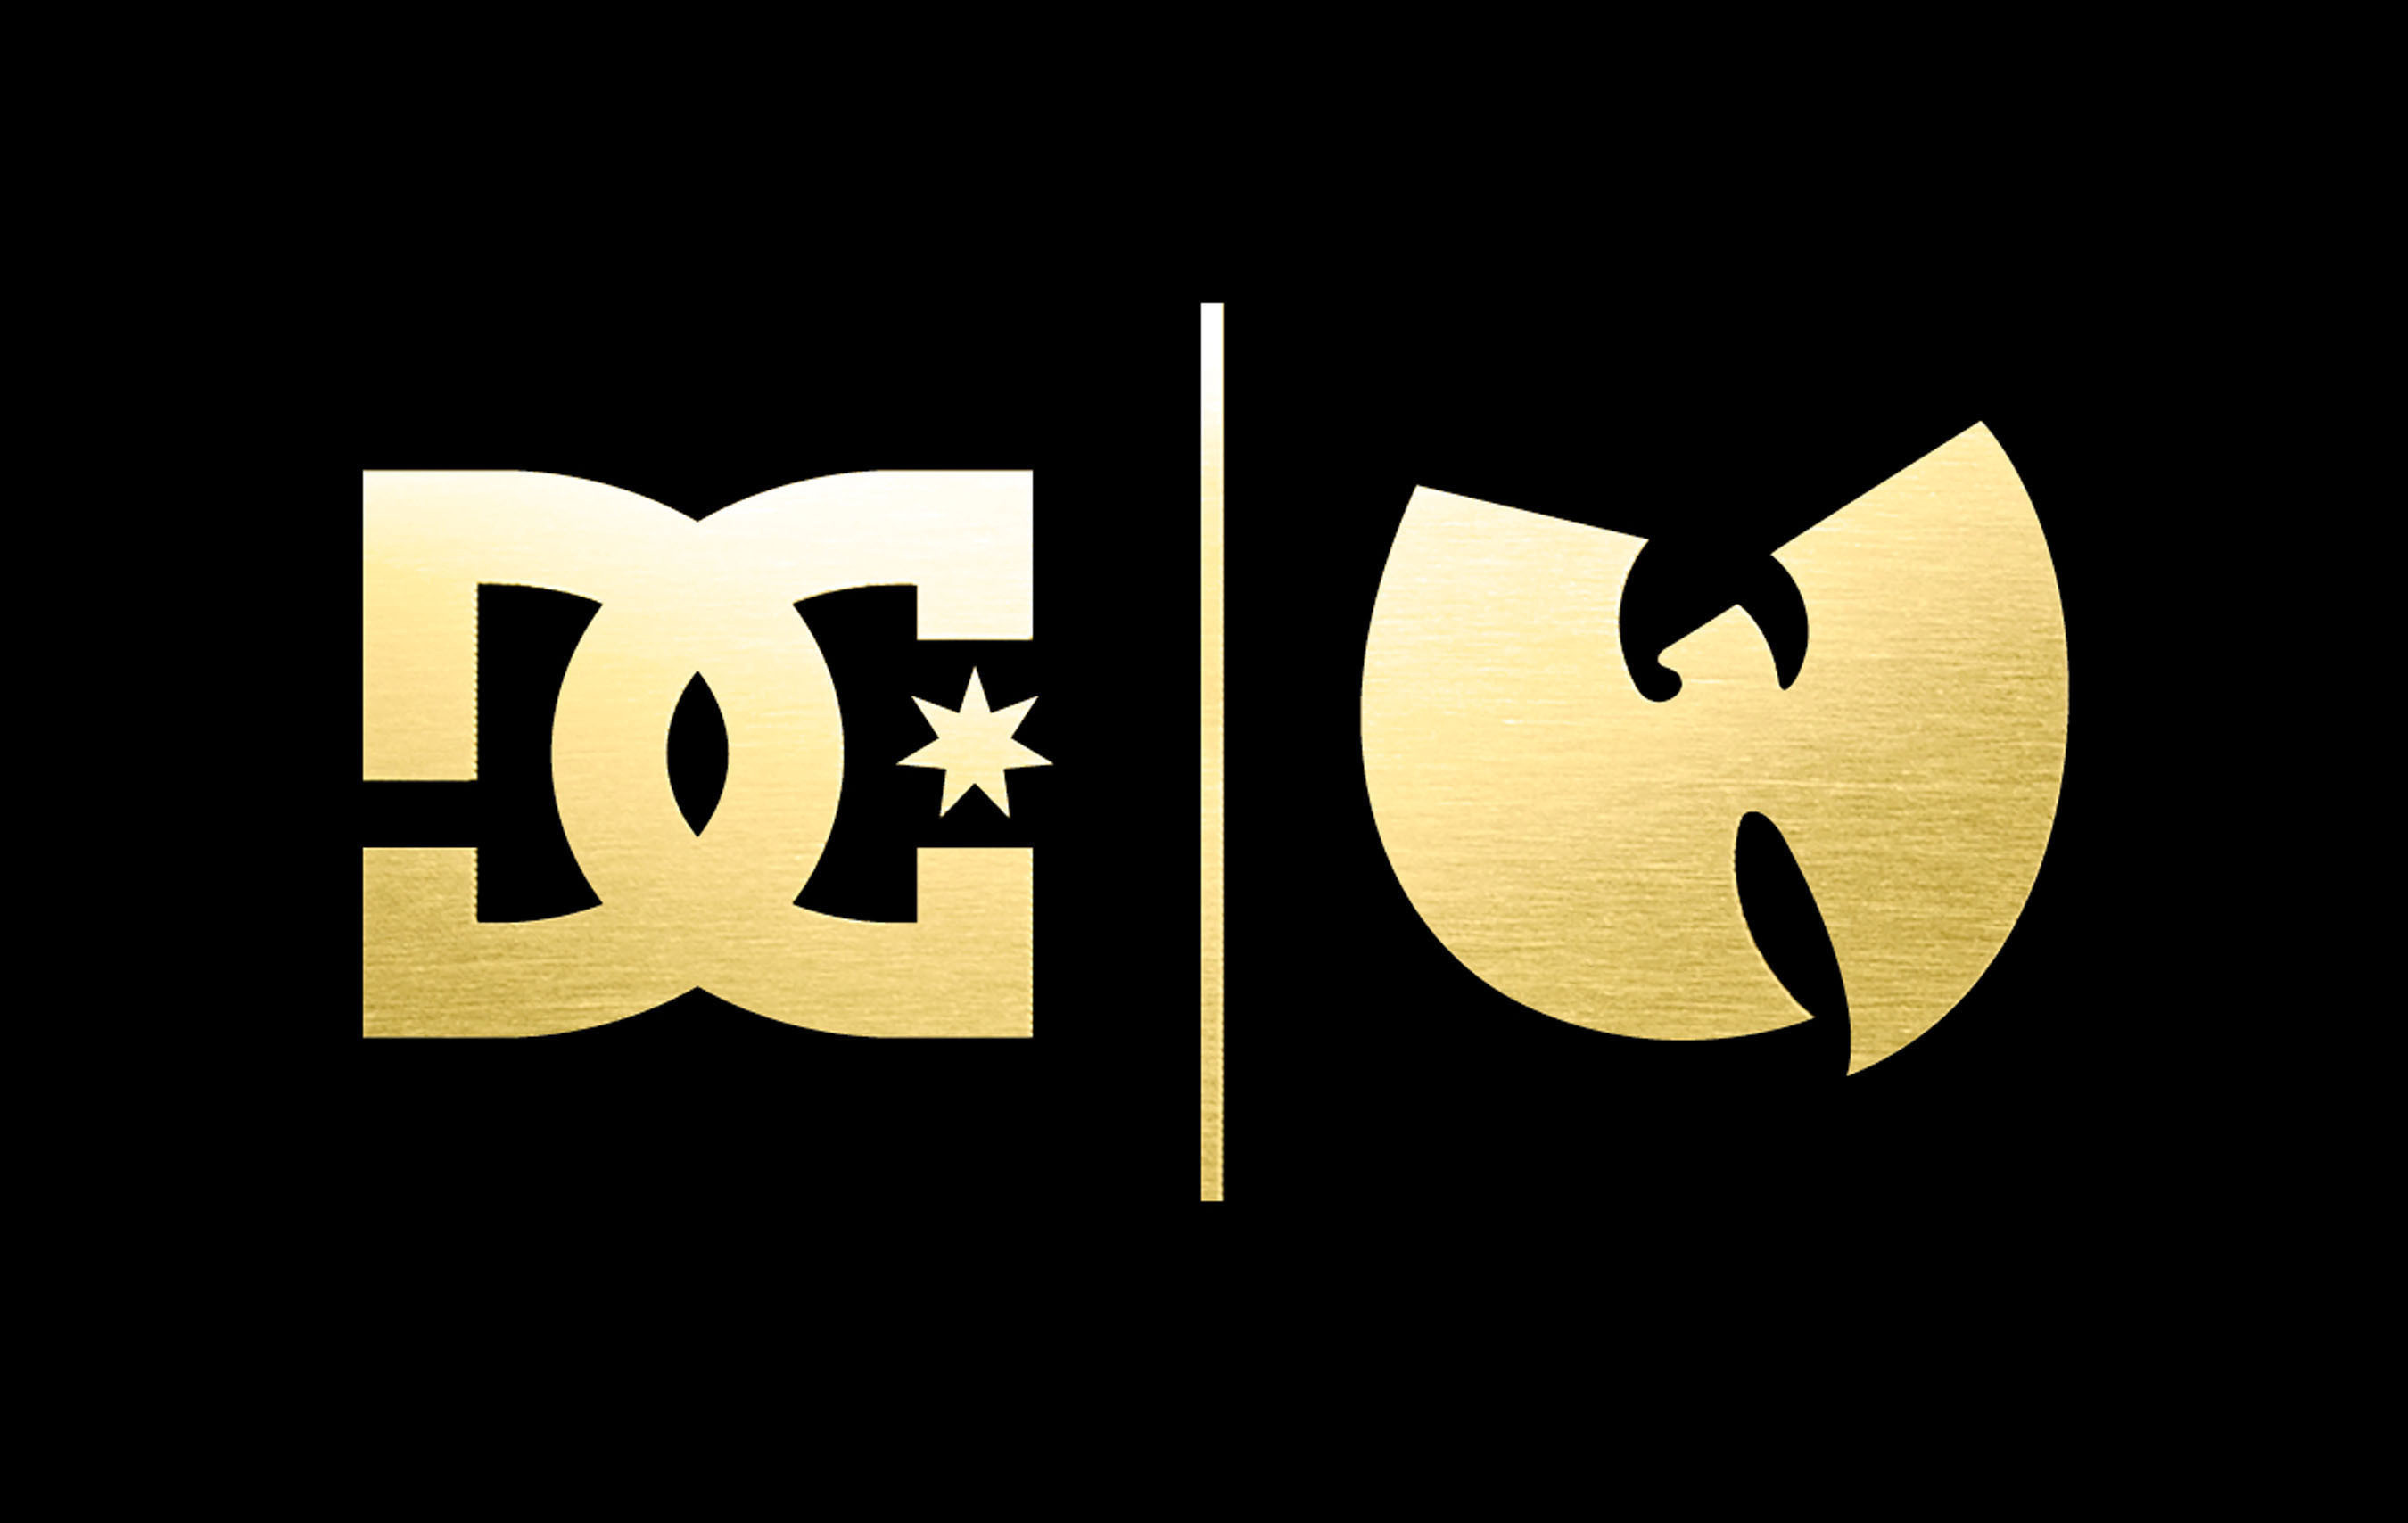 DC Shoes Joins Forces With Wu-Tang On Limited-Edition Product Celebrating 20 Year Of Groundbreaking Album